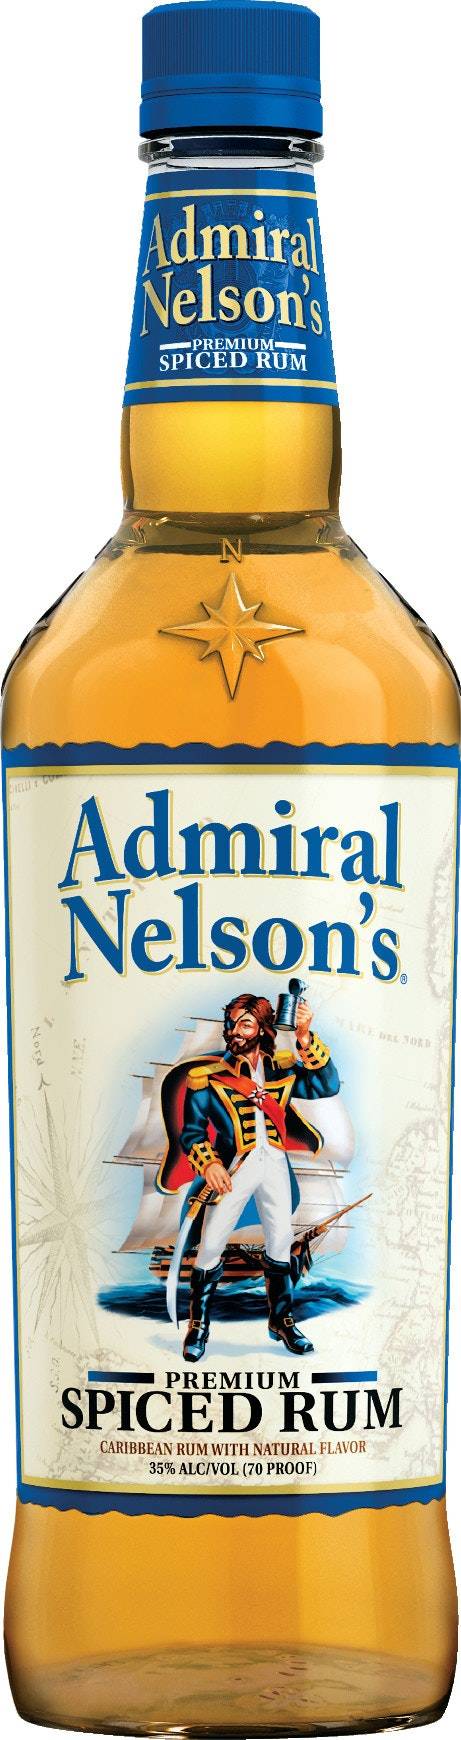 Admiral Nelson's Spiced Rum( 1 L)